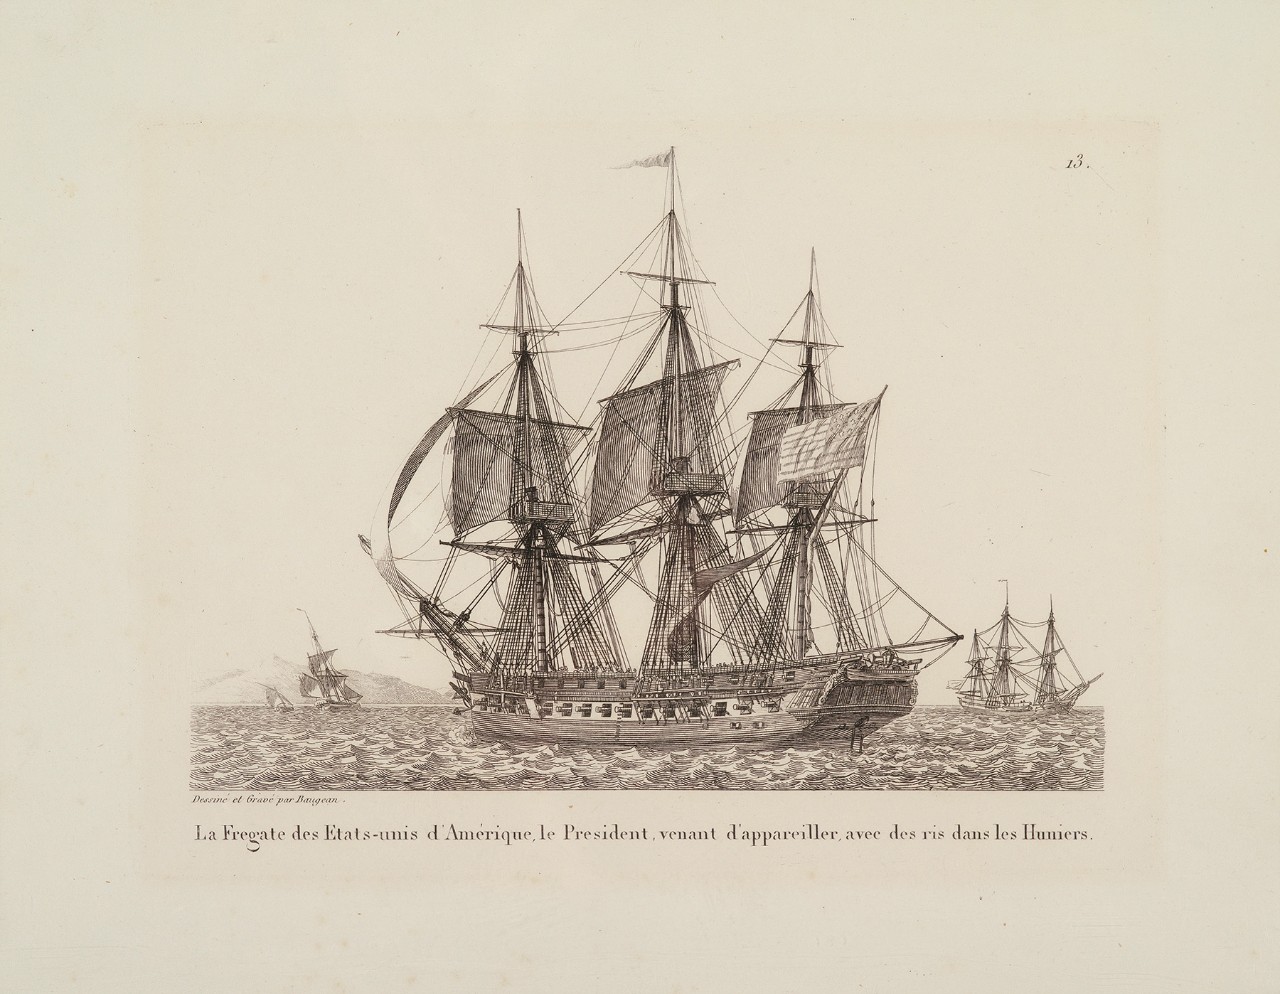 Portside view of a sailing ship at anchor, three other ship in the background